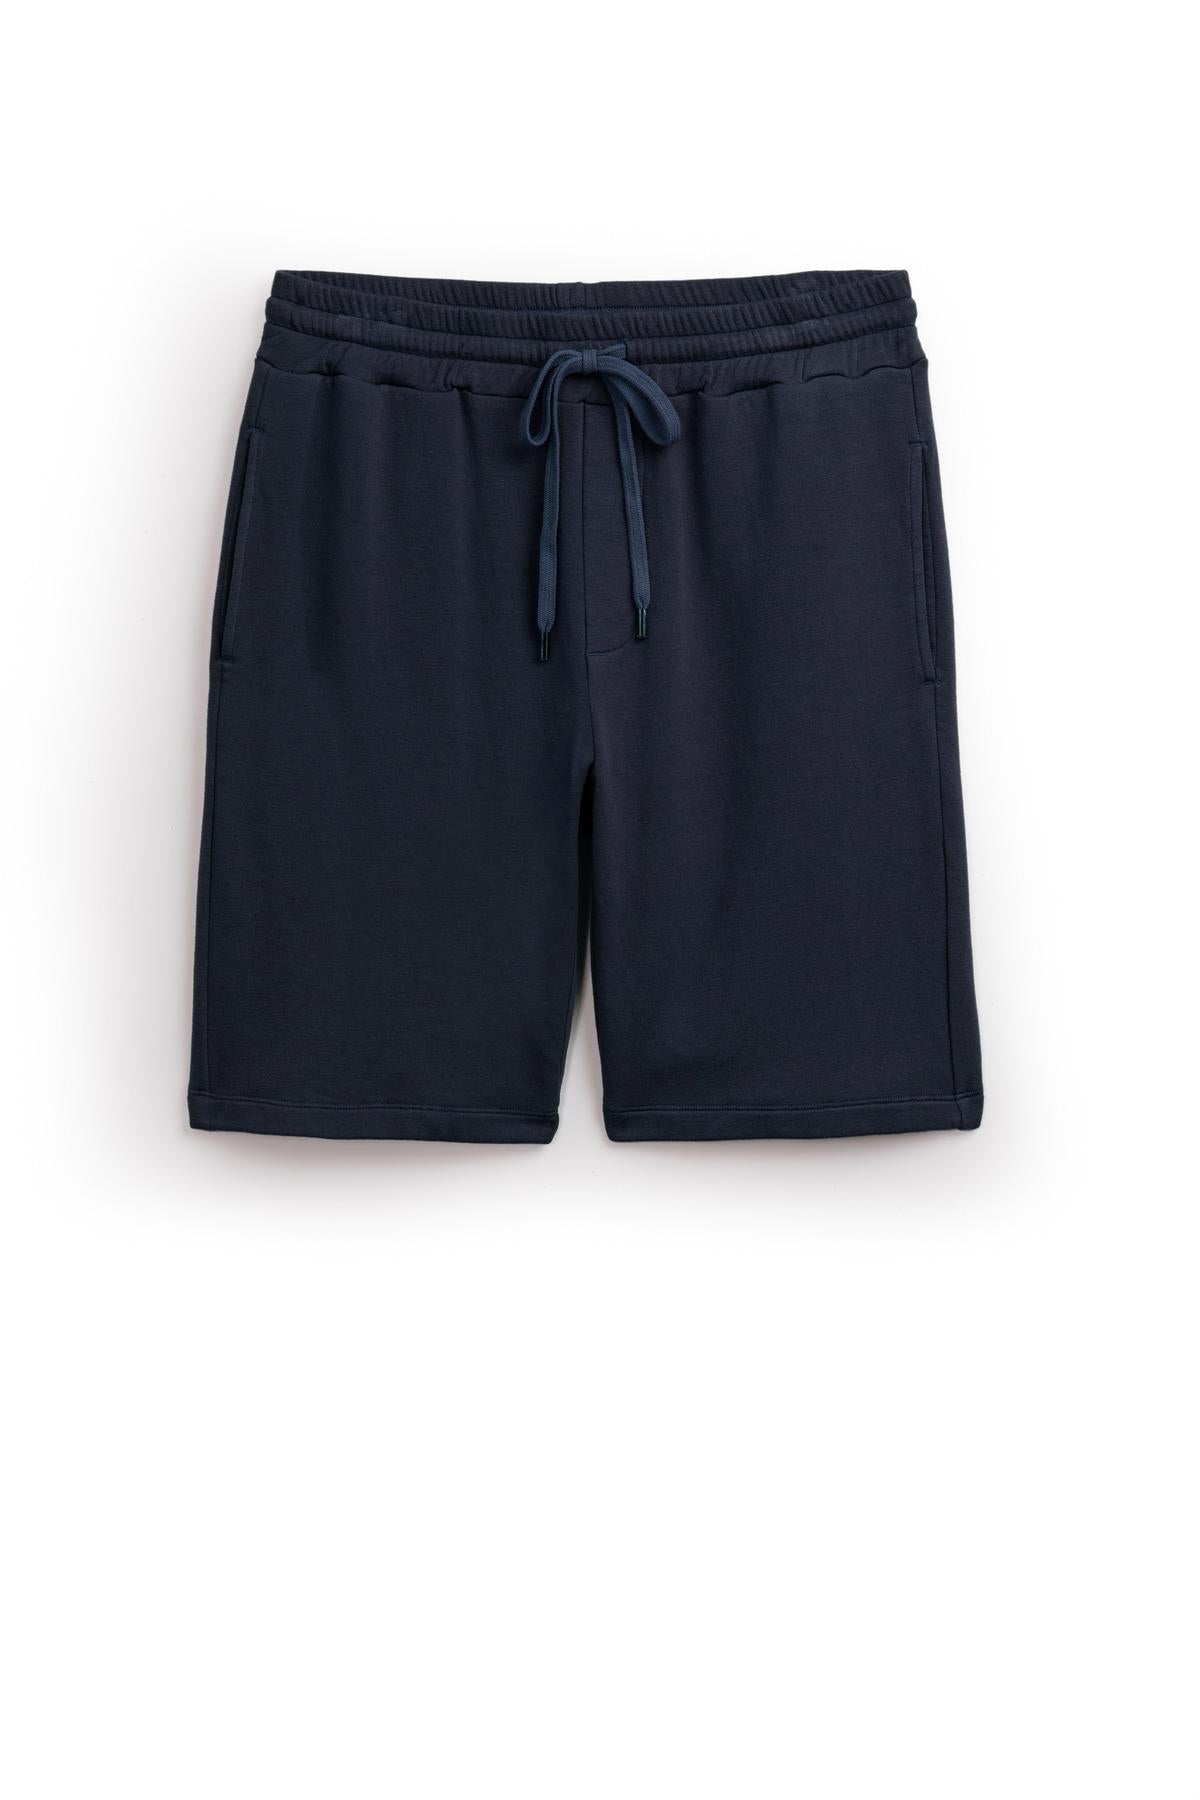 The ATLAS LUXE FLEECE DRAWSTRING SHORT by Velvet by Graham & Spencer are a perfect combination of tailored design and heavy rotation. With their comfortable fleece knit construction, these shorts provide both style and function for any occasion.-35678670880961